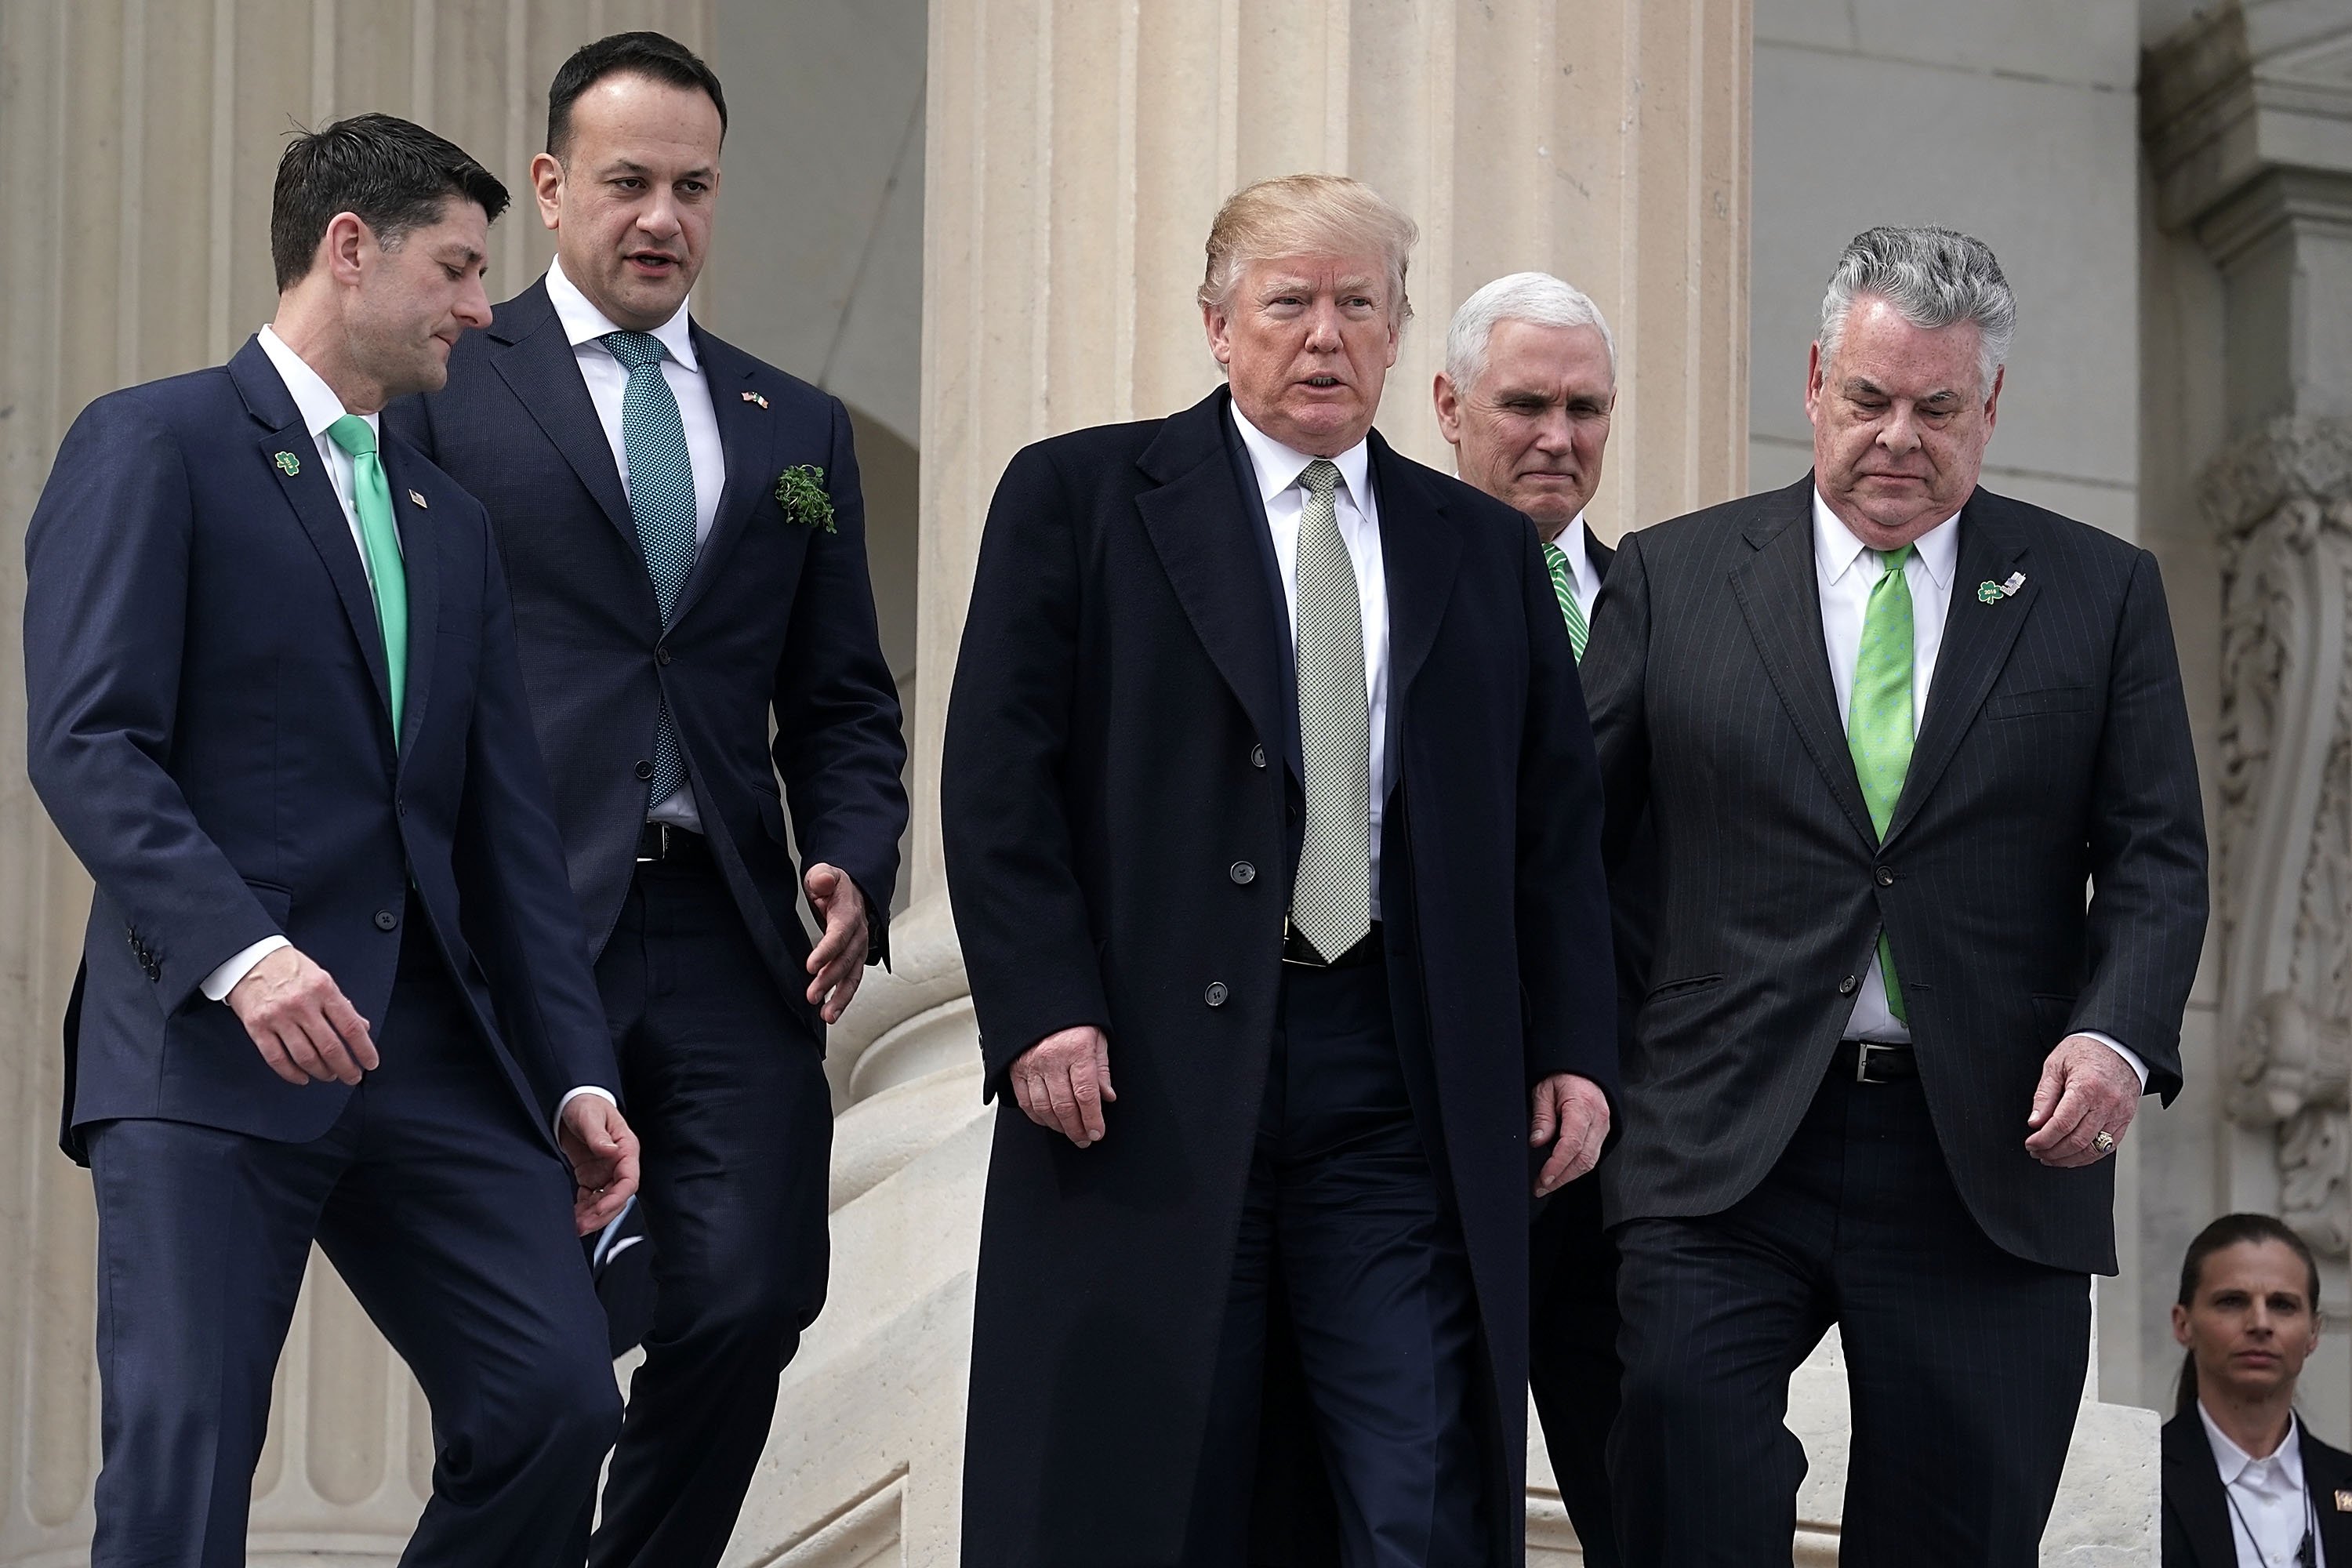 WASHINGTON, DC - MARCH 15: (L-R) U.S. Speaker of the House Rep. Paul Ryan (R-WI), Irish Taoiseach Leo Varadkar , President Donald Trump, U.S. Vice President Mike Pence, and U.S. Rep. Peter King (R-NY) walk down the House steps at the Capitol after the Friends of Ireland luncheon March 15, 2018 on Capitol Hill in Washington, DC. Trump and Varadkar attended the annual luncheon hosted by Speaker Ryan, to commemorate St. Patrick's Day. (Photo by Alex Wong/Getty Images)